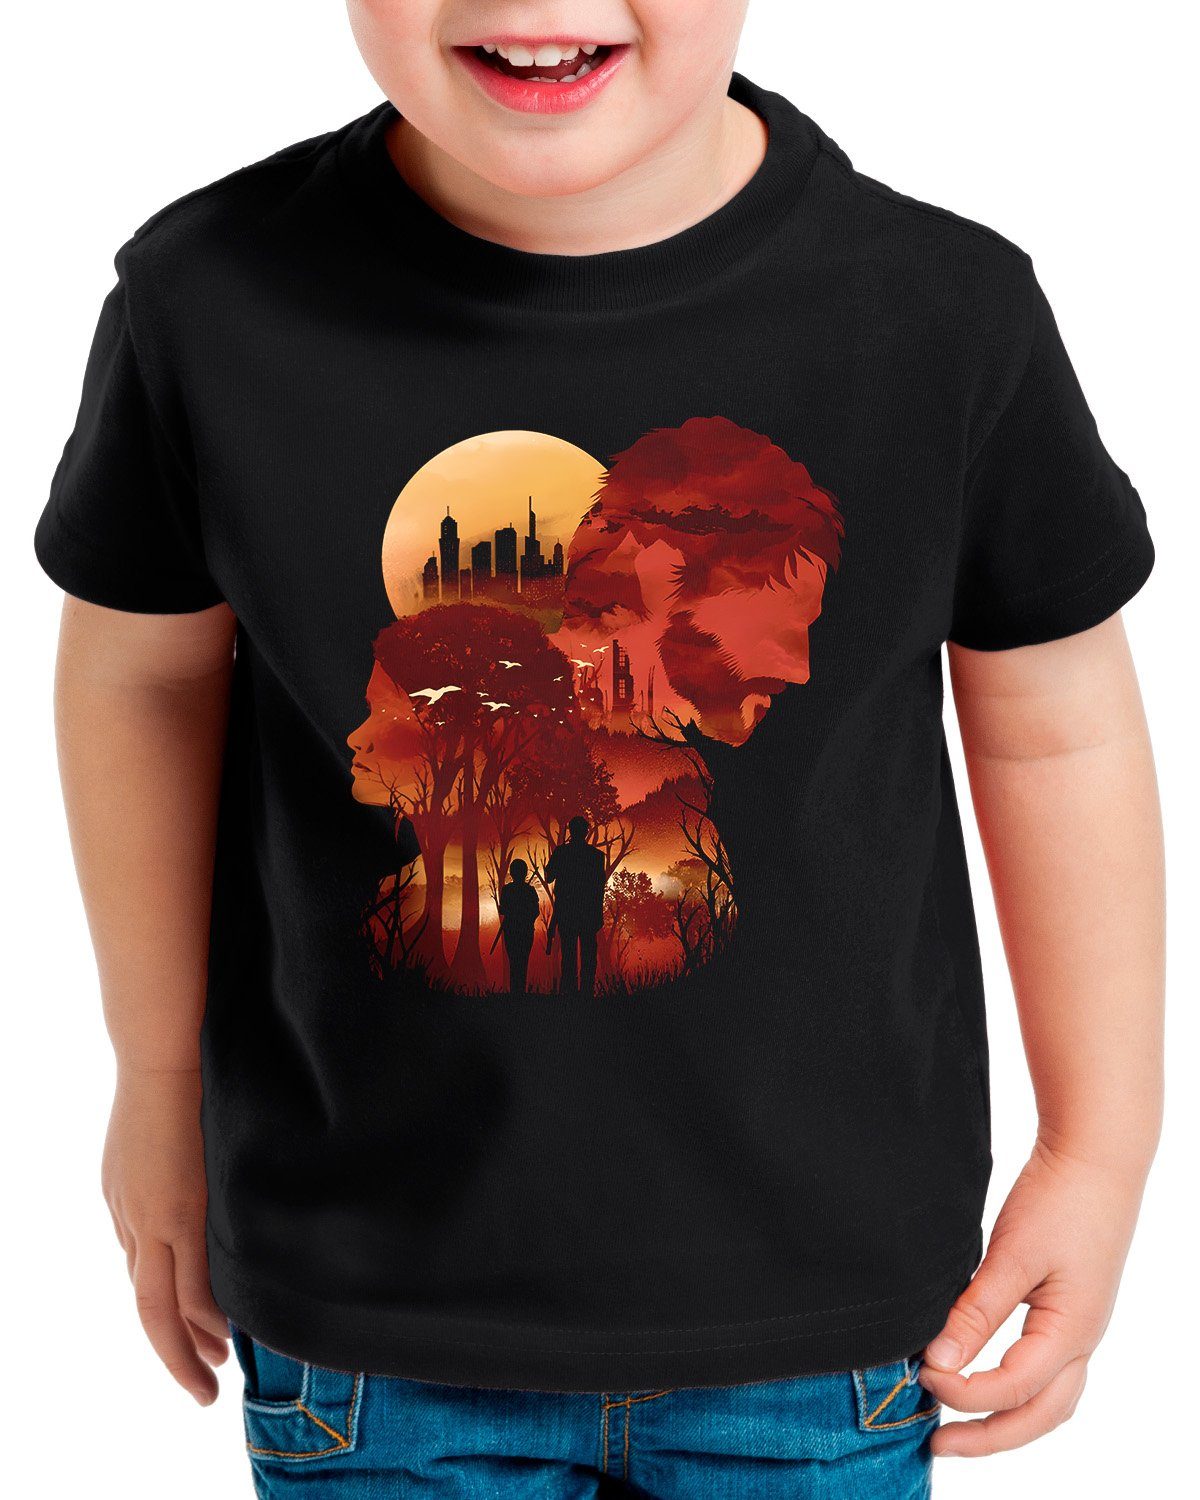 last the Print-Shirt T-Shirt Kinder ps4 Cure style3 of videospiel us ps5 Sunset tv